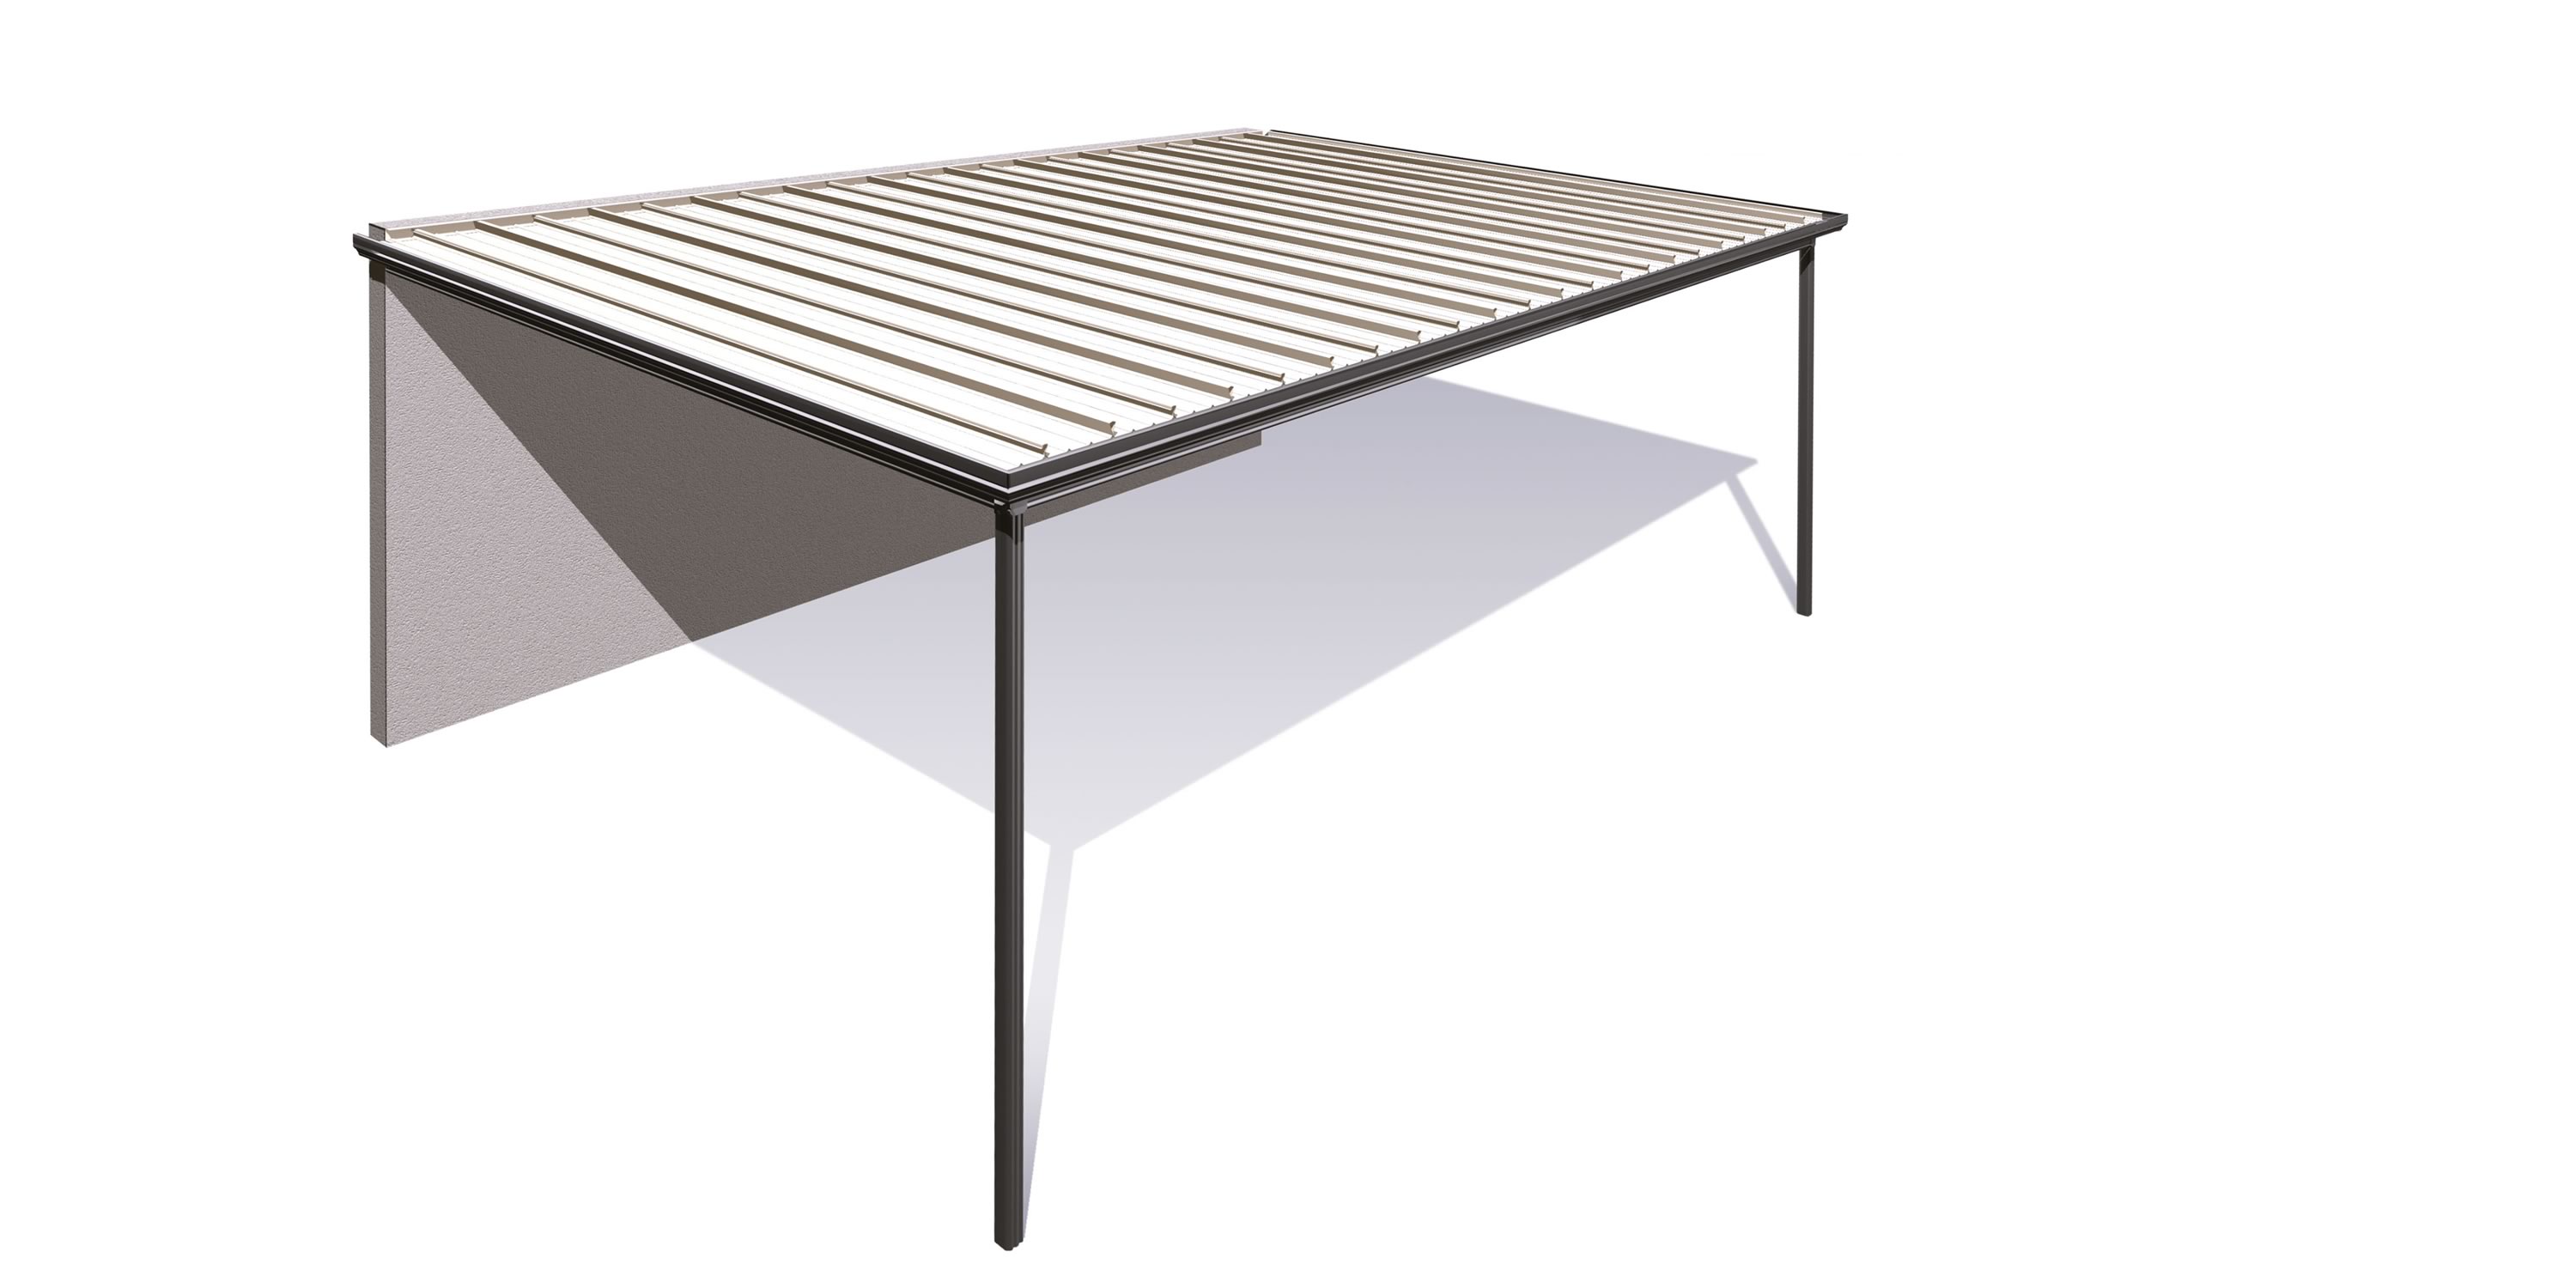 Outback patio – flat